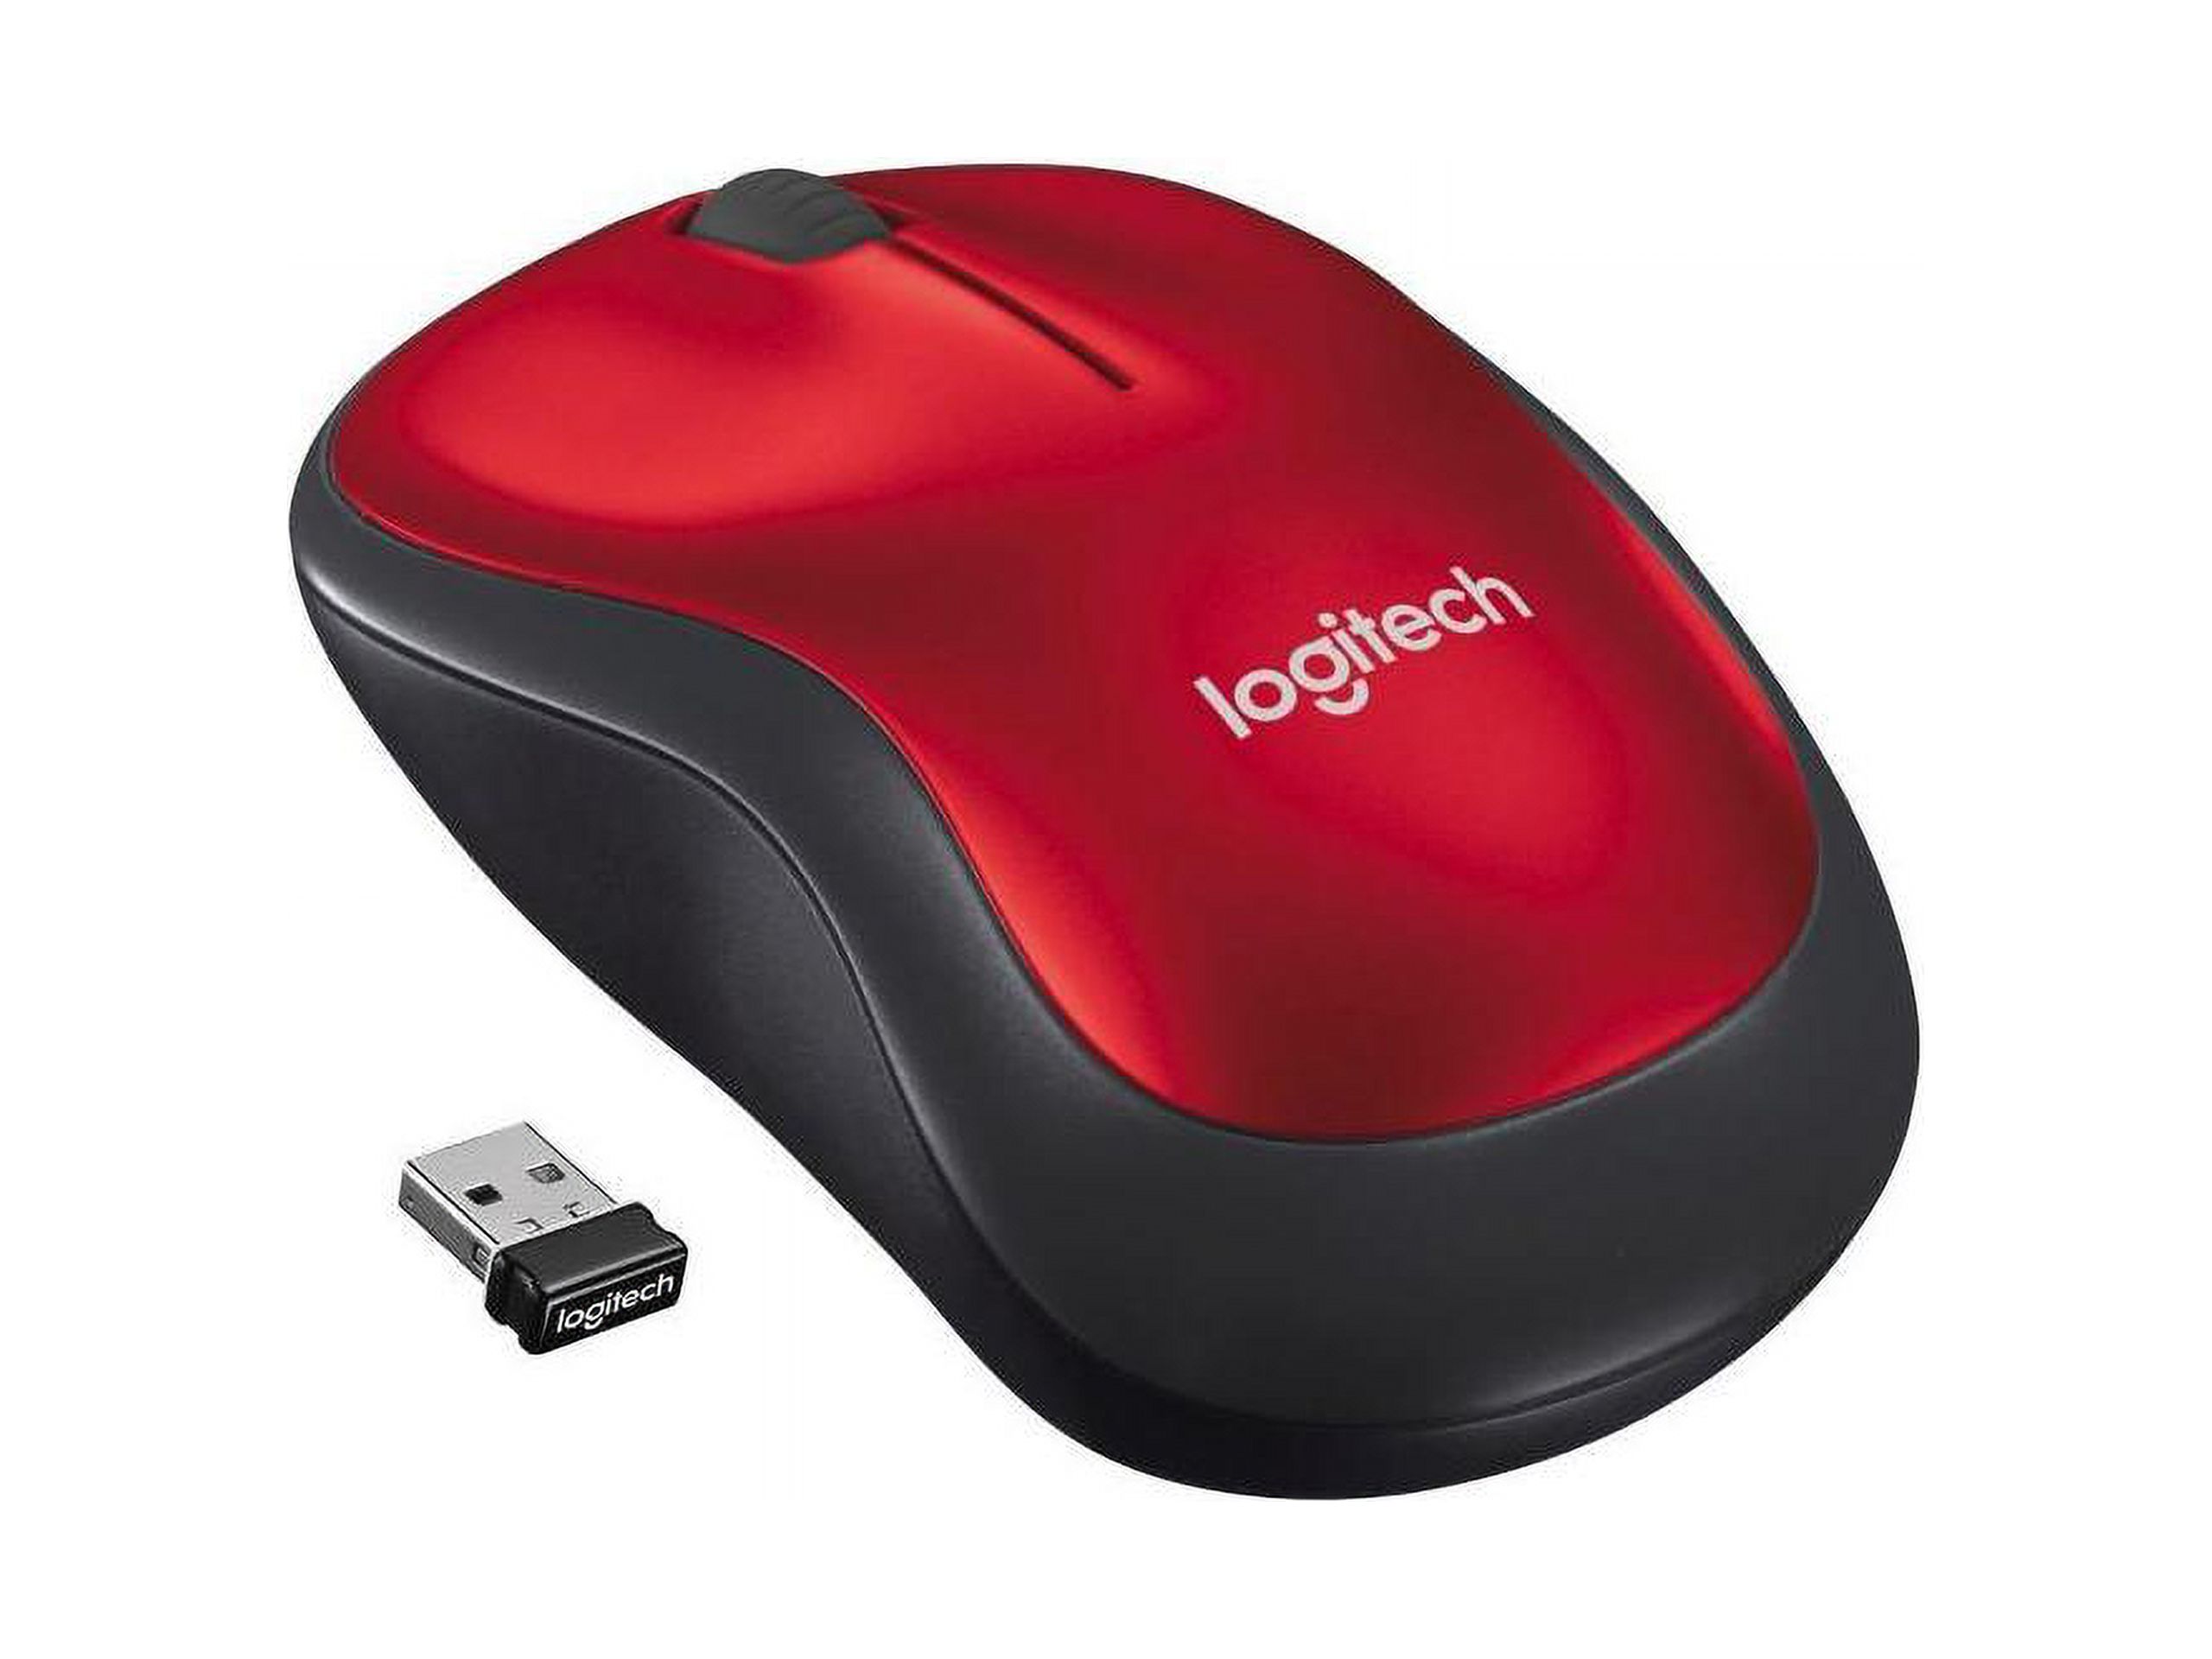 Logitech M185 Wireless Mouse, 2.4GHz with USB Mini Receiver, Ambidextrous, Red - image 3 of 15